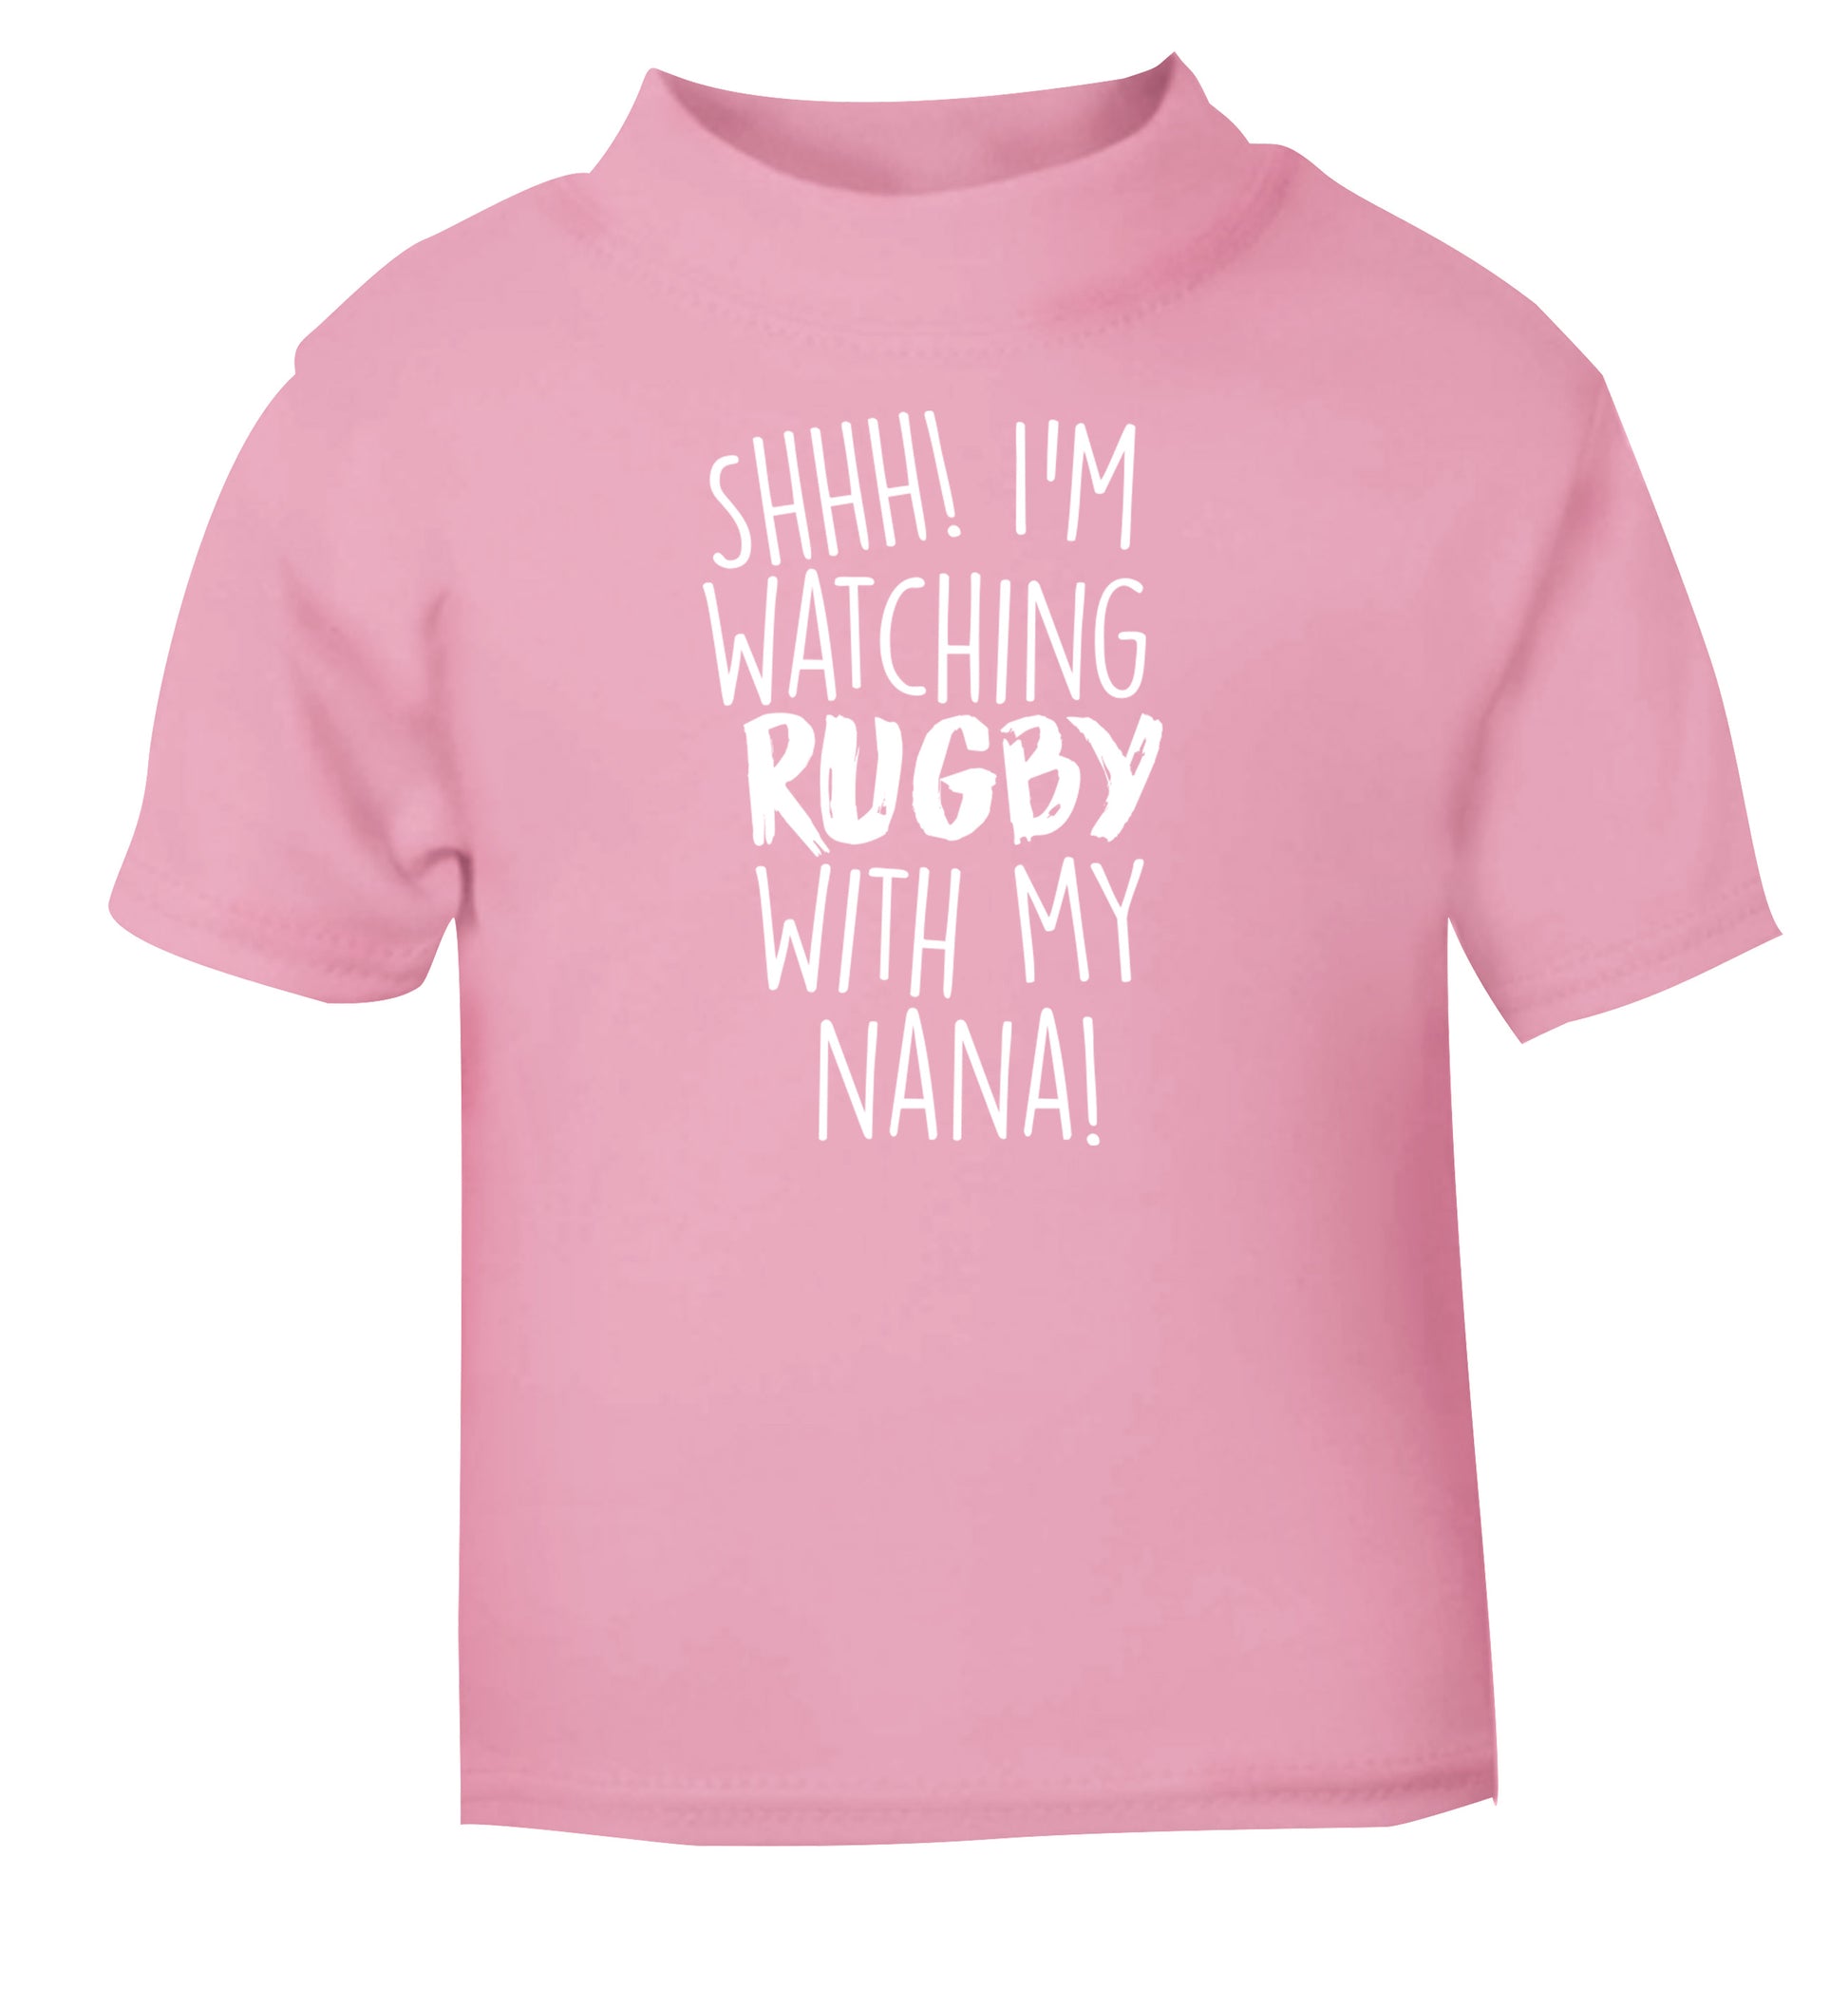 Shh I'm watching rugby with my nana light pink Baby Toddler Tshirt 2 Years